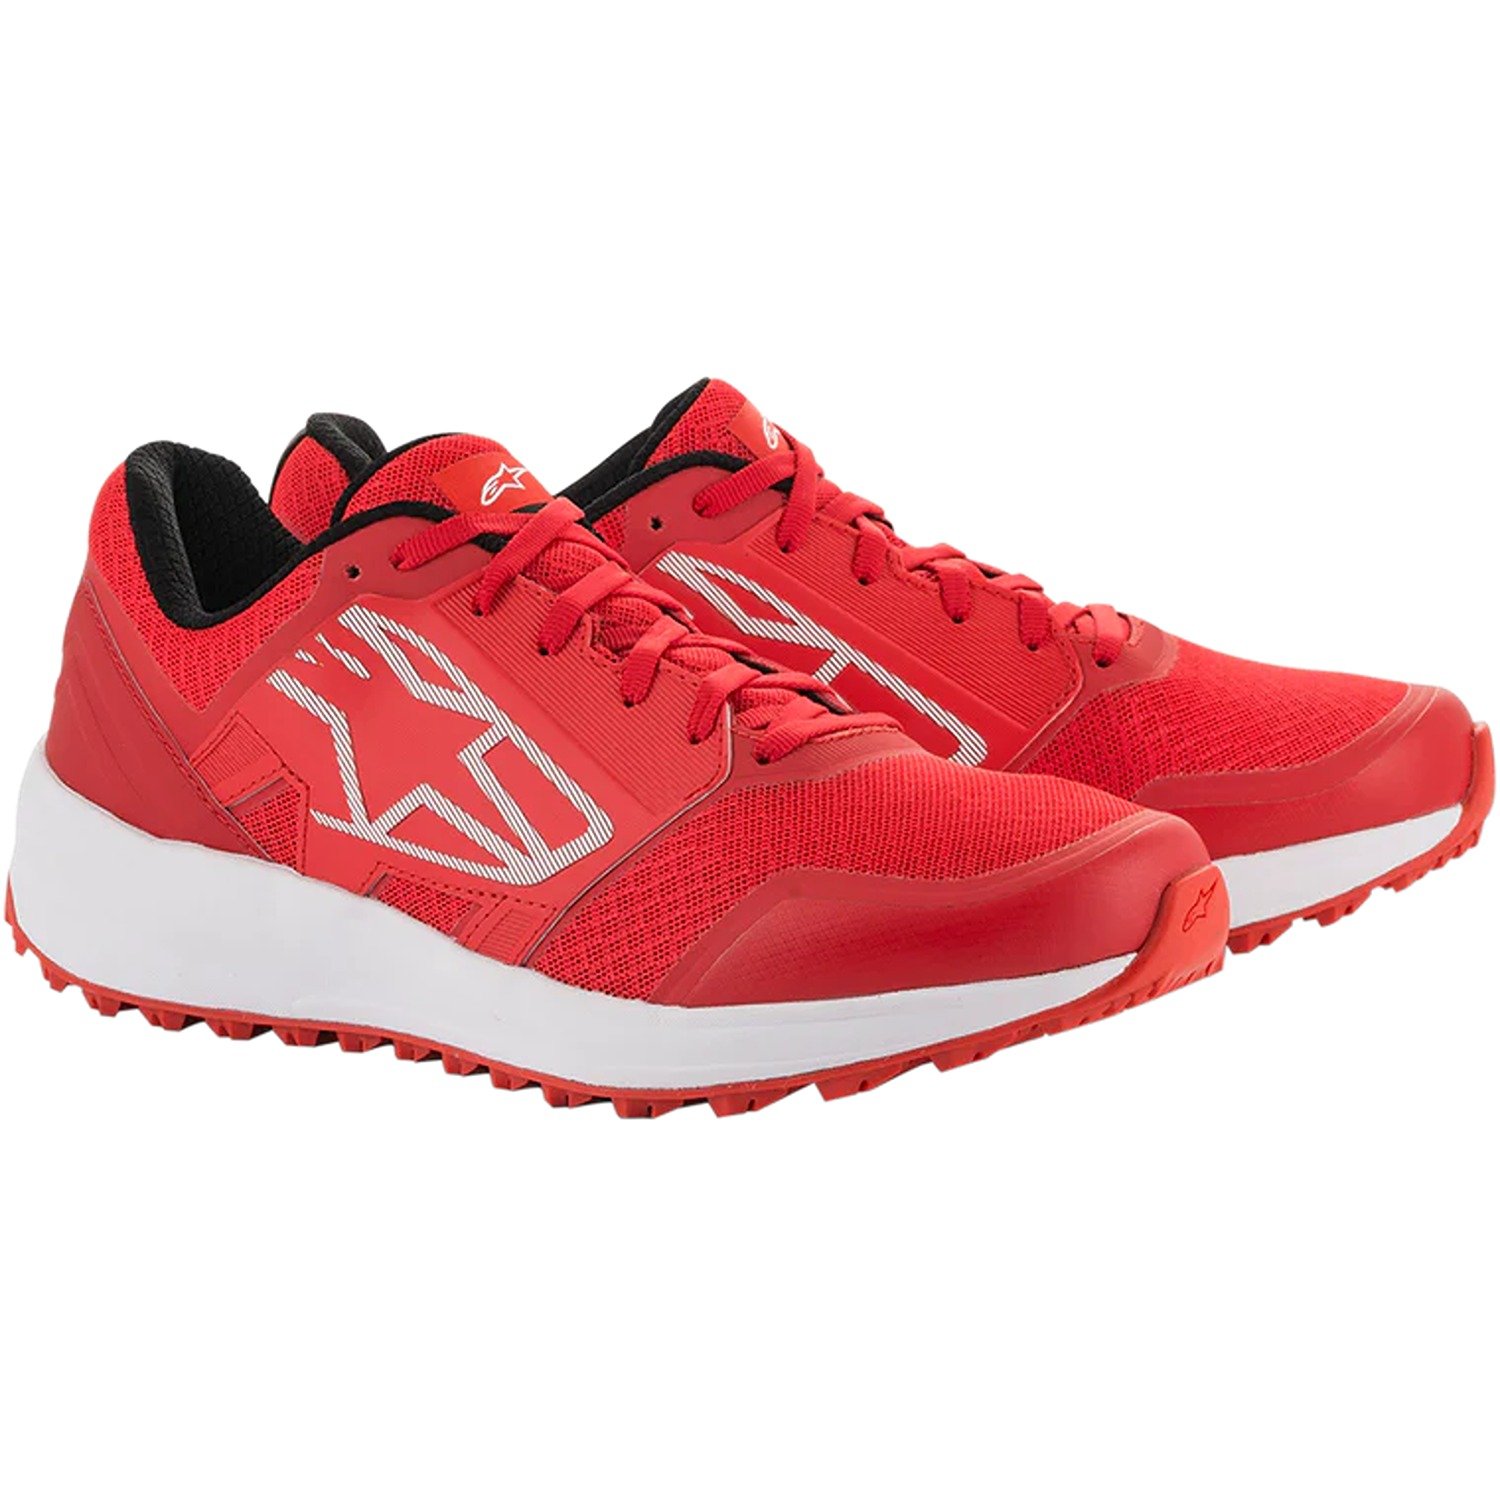 Image of Alpinestars Meta Trail Shoes Red White Taille US 75